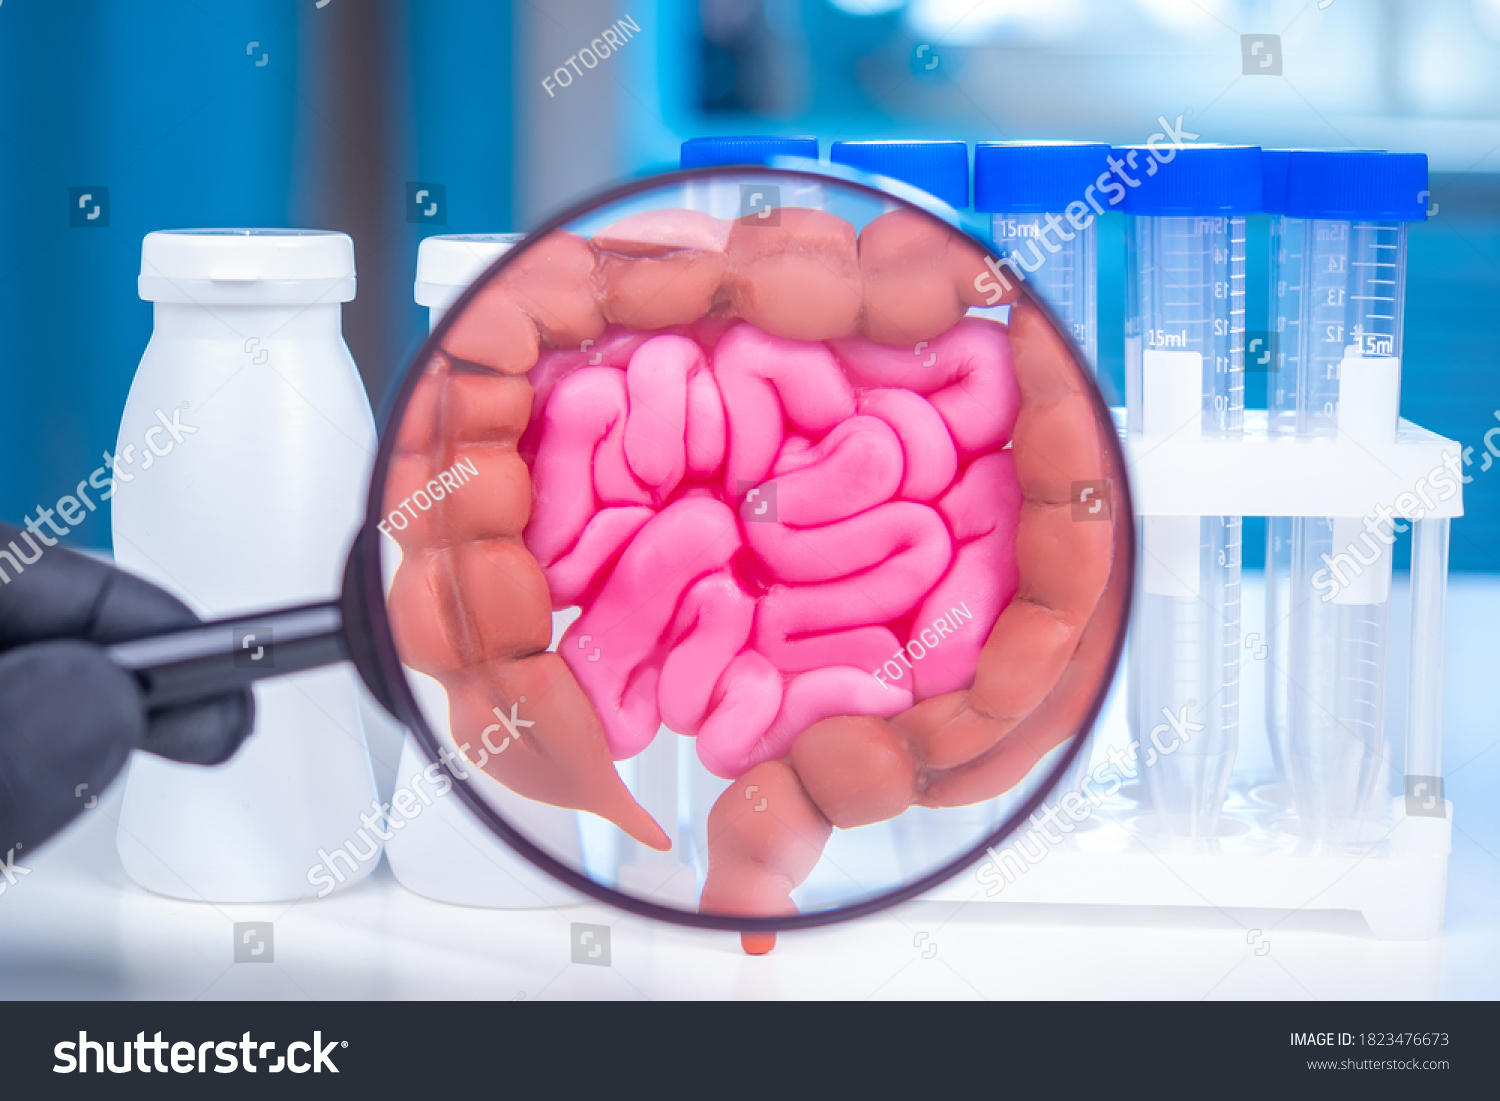 Human intestines under magnifying glass. Concept - study of gastrointestinal tract. Development of drugs for intestines. Probiotic production for intestines. Human health. Sample tubes near intestin #1823476673